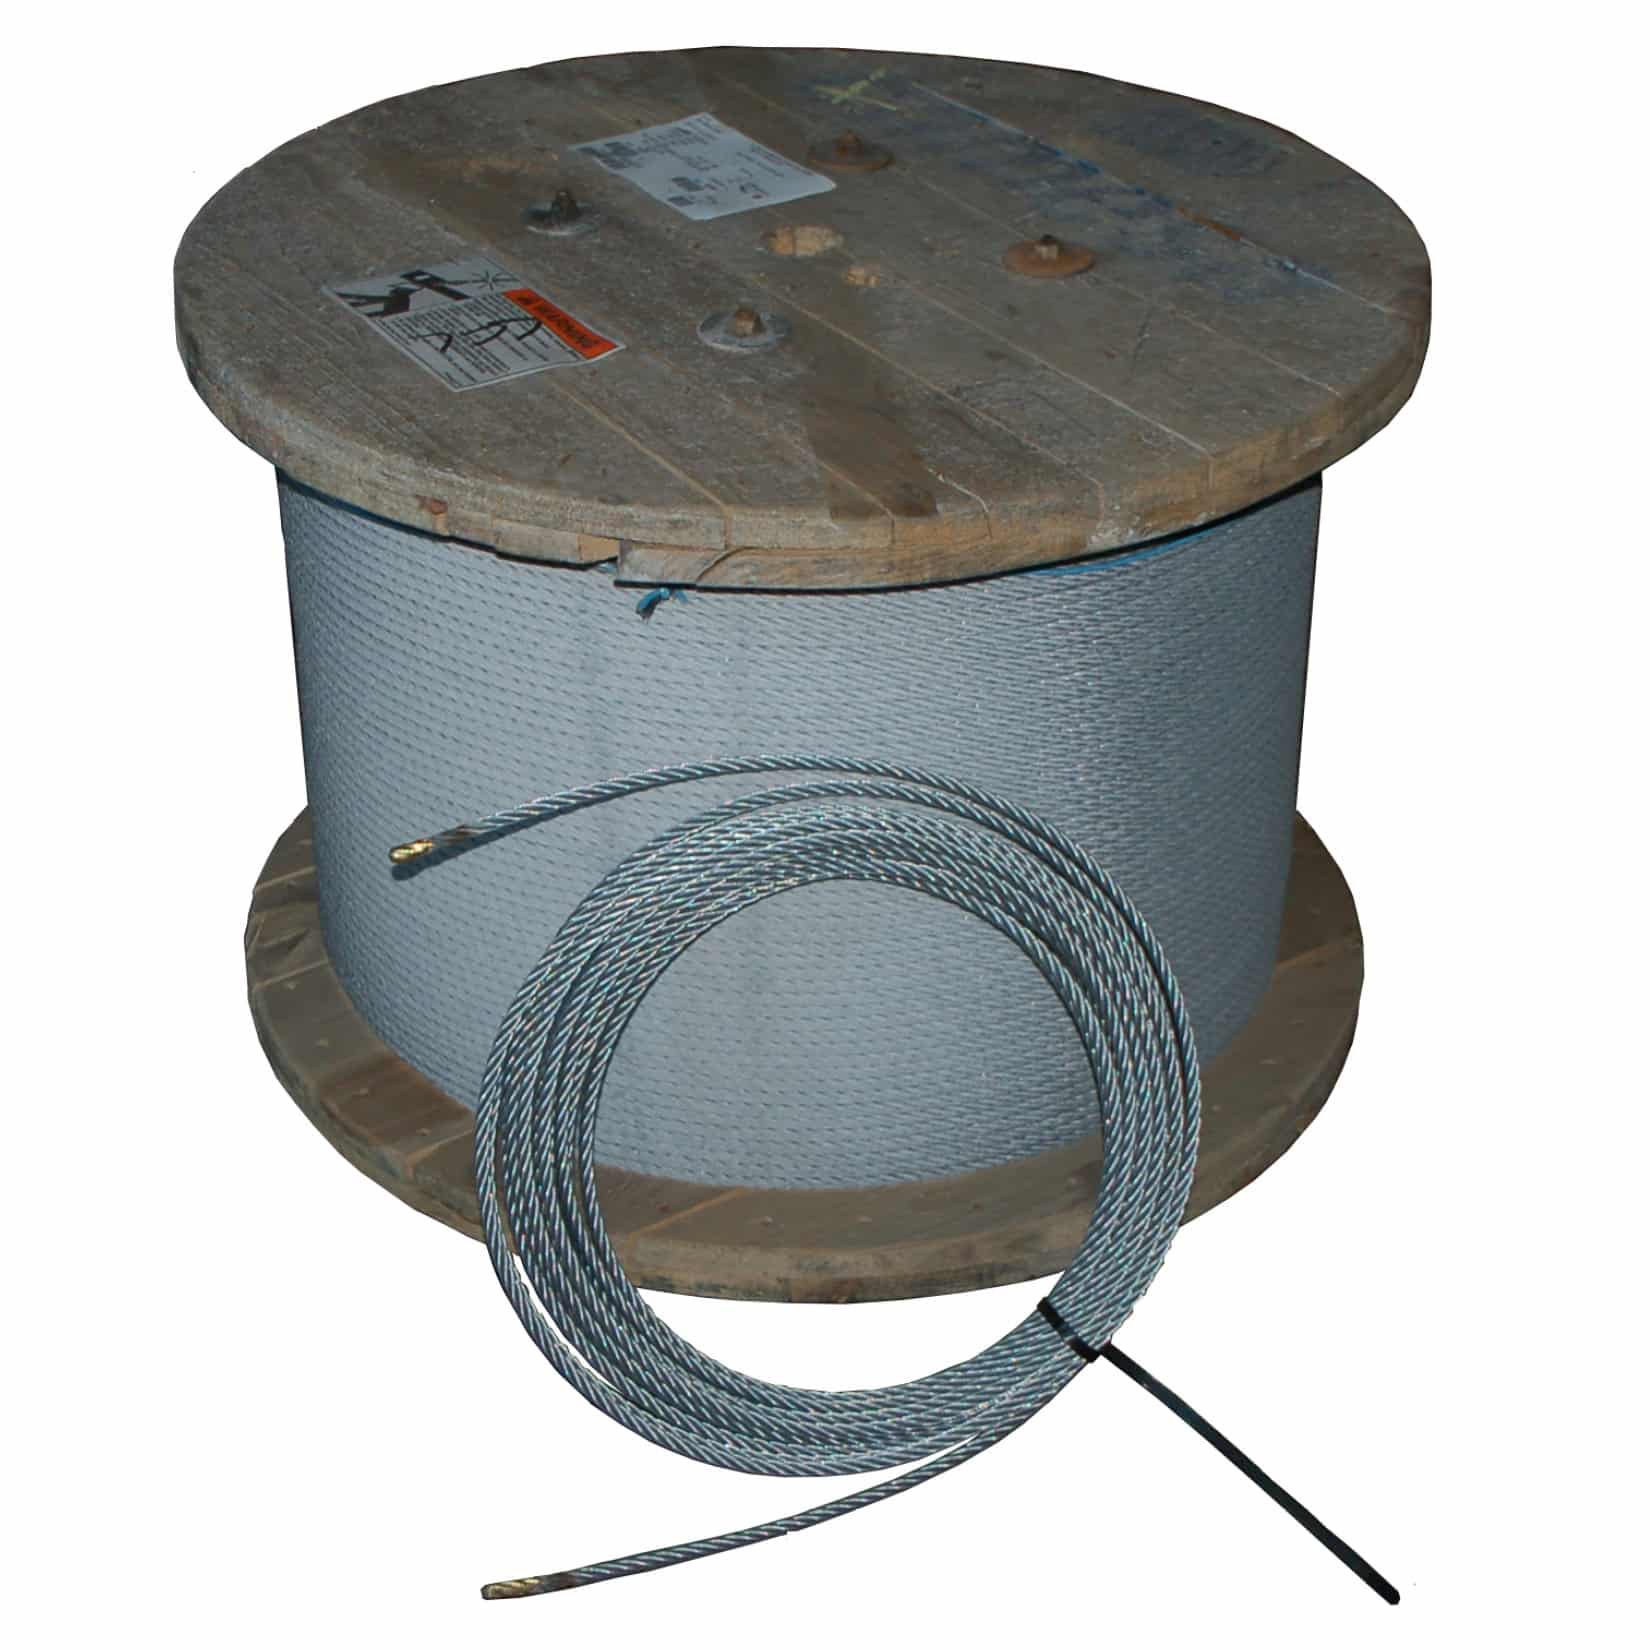 Galvanized stainless steel wire reel (1,26 mm)